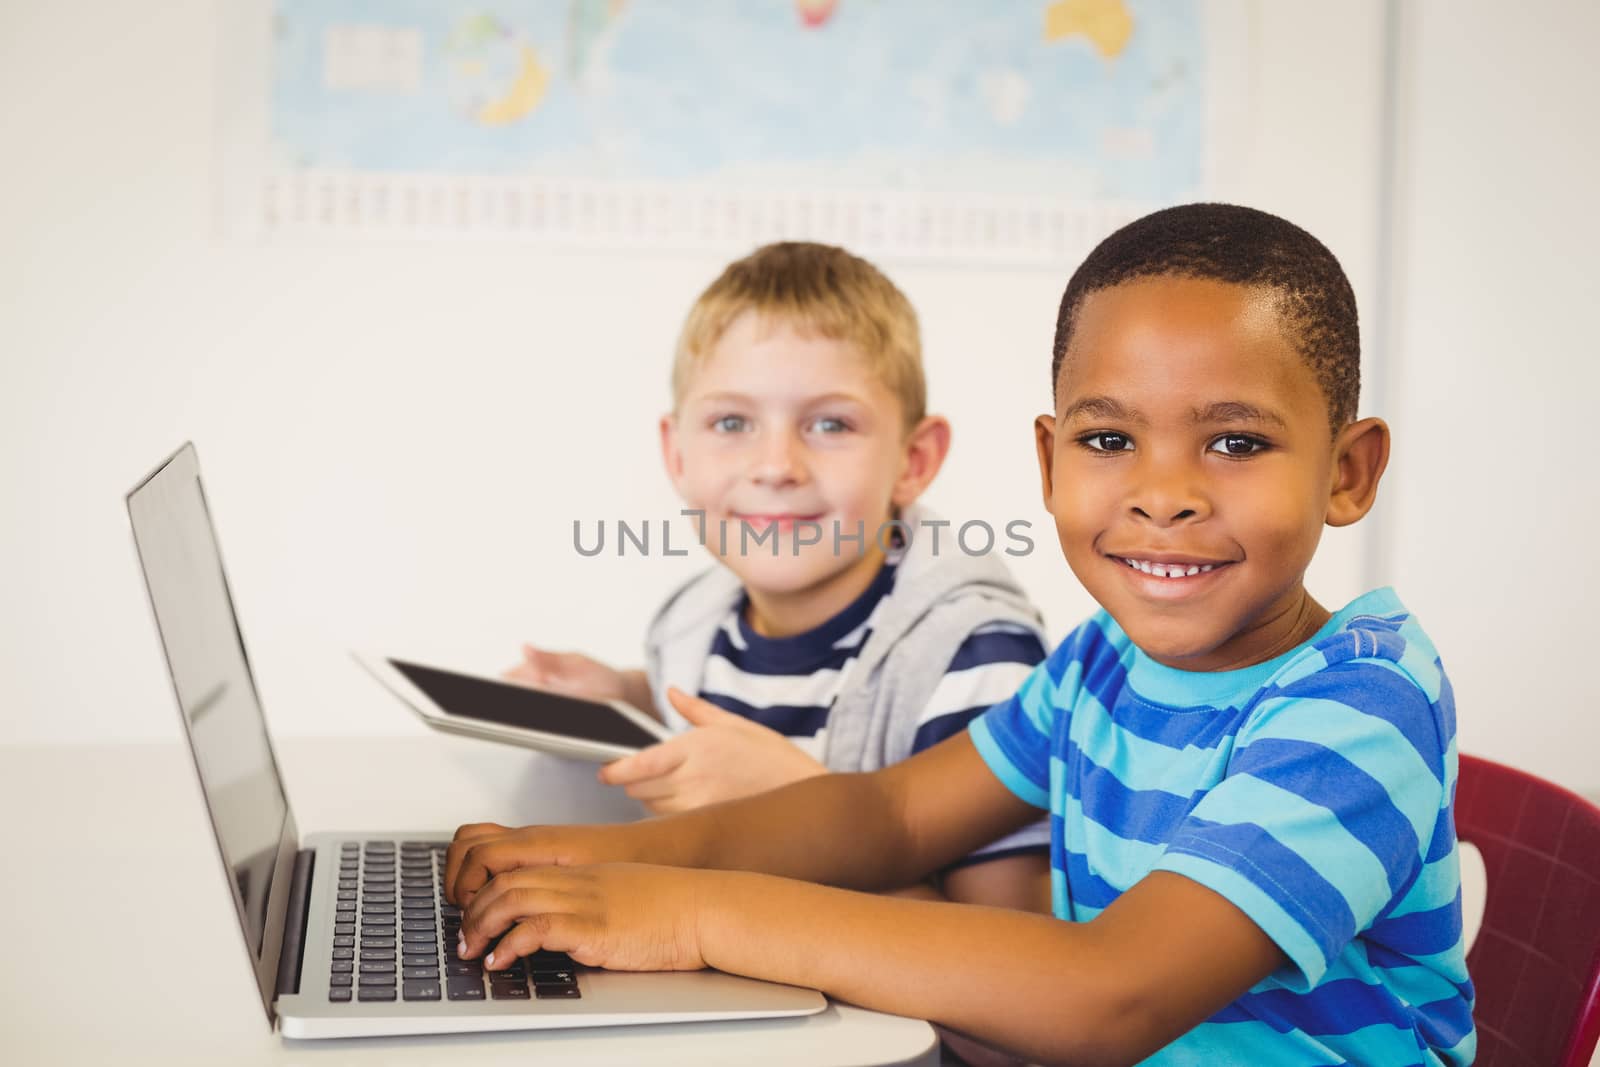 Portrait of smiling kids using a laptop and digital tablet in classroom at school